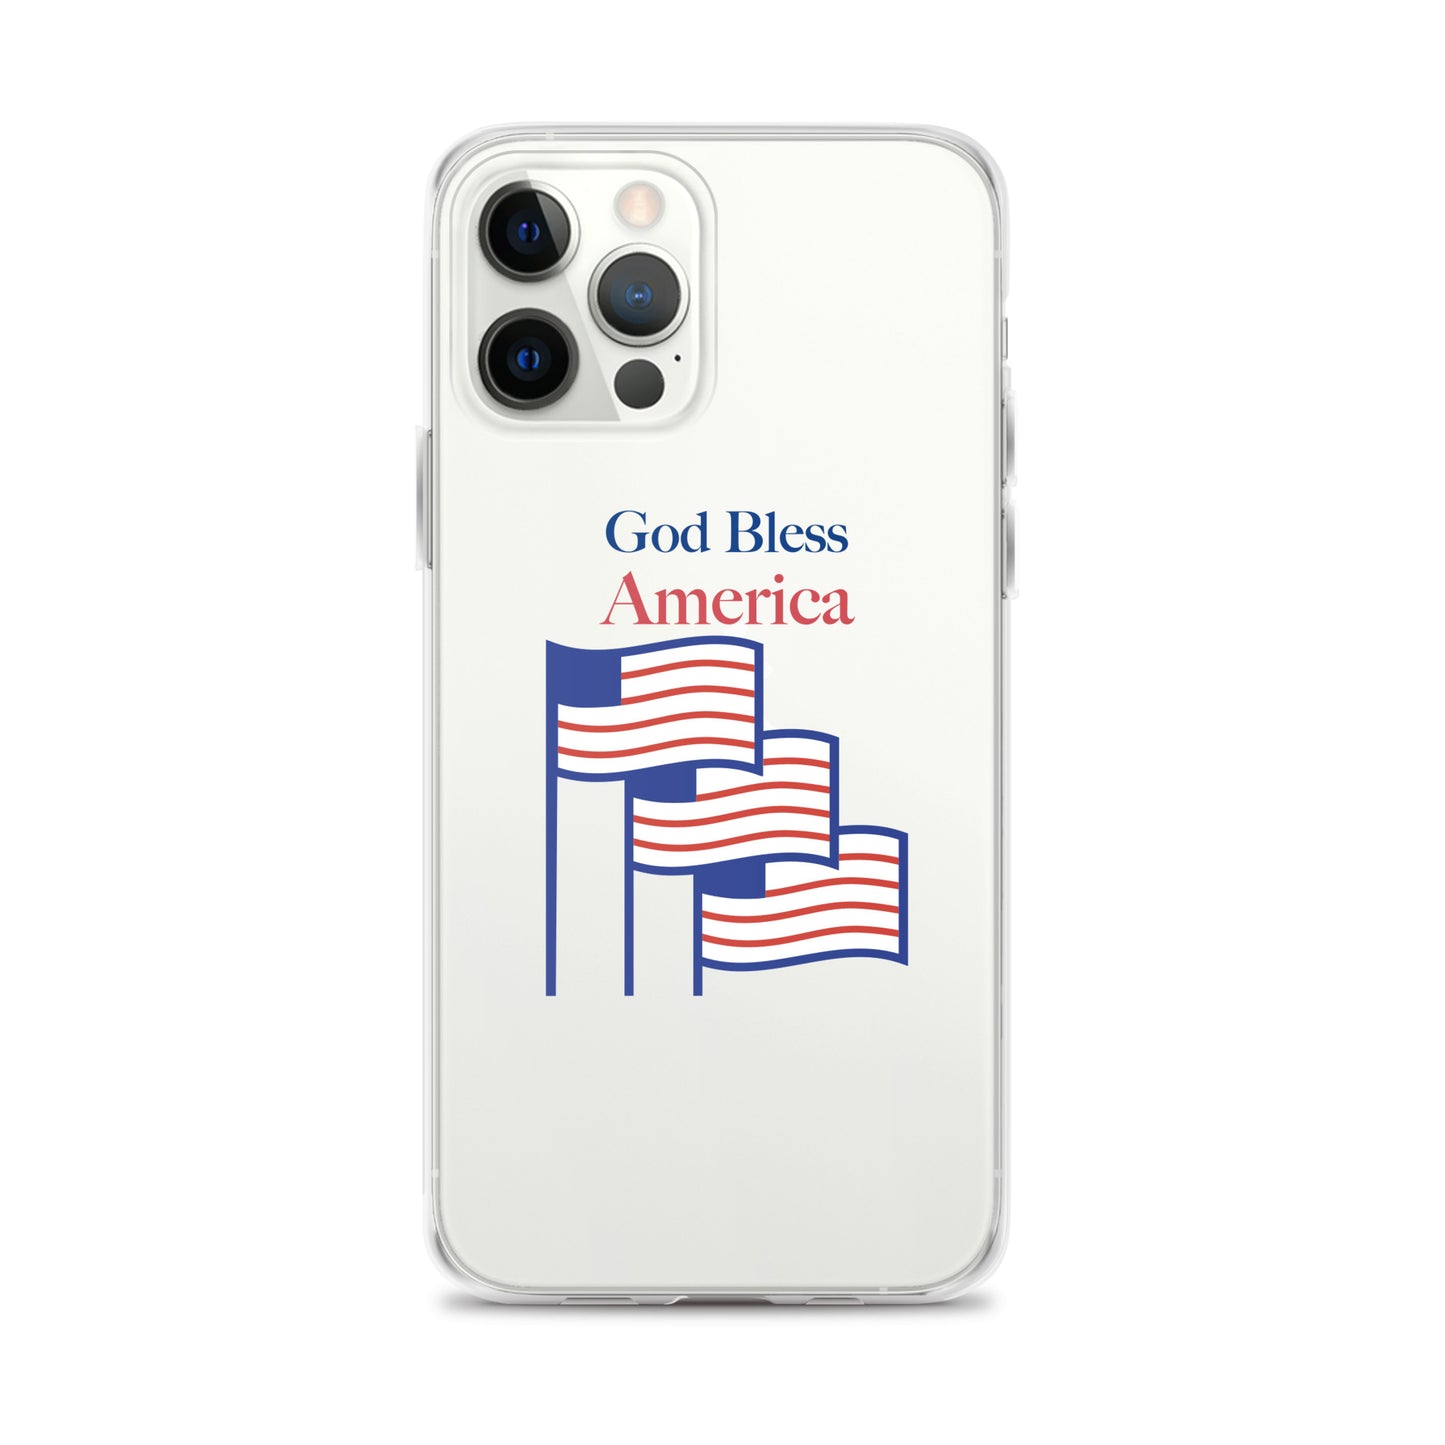 iPhone Case - God Bless America